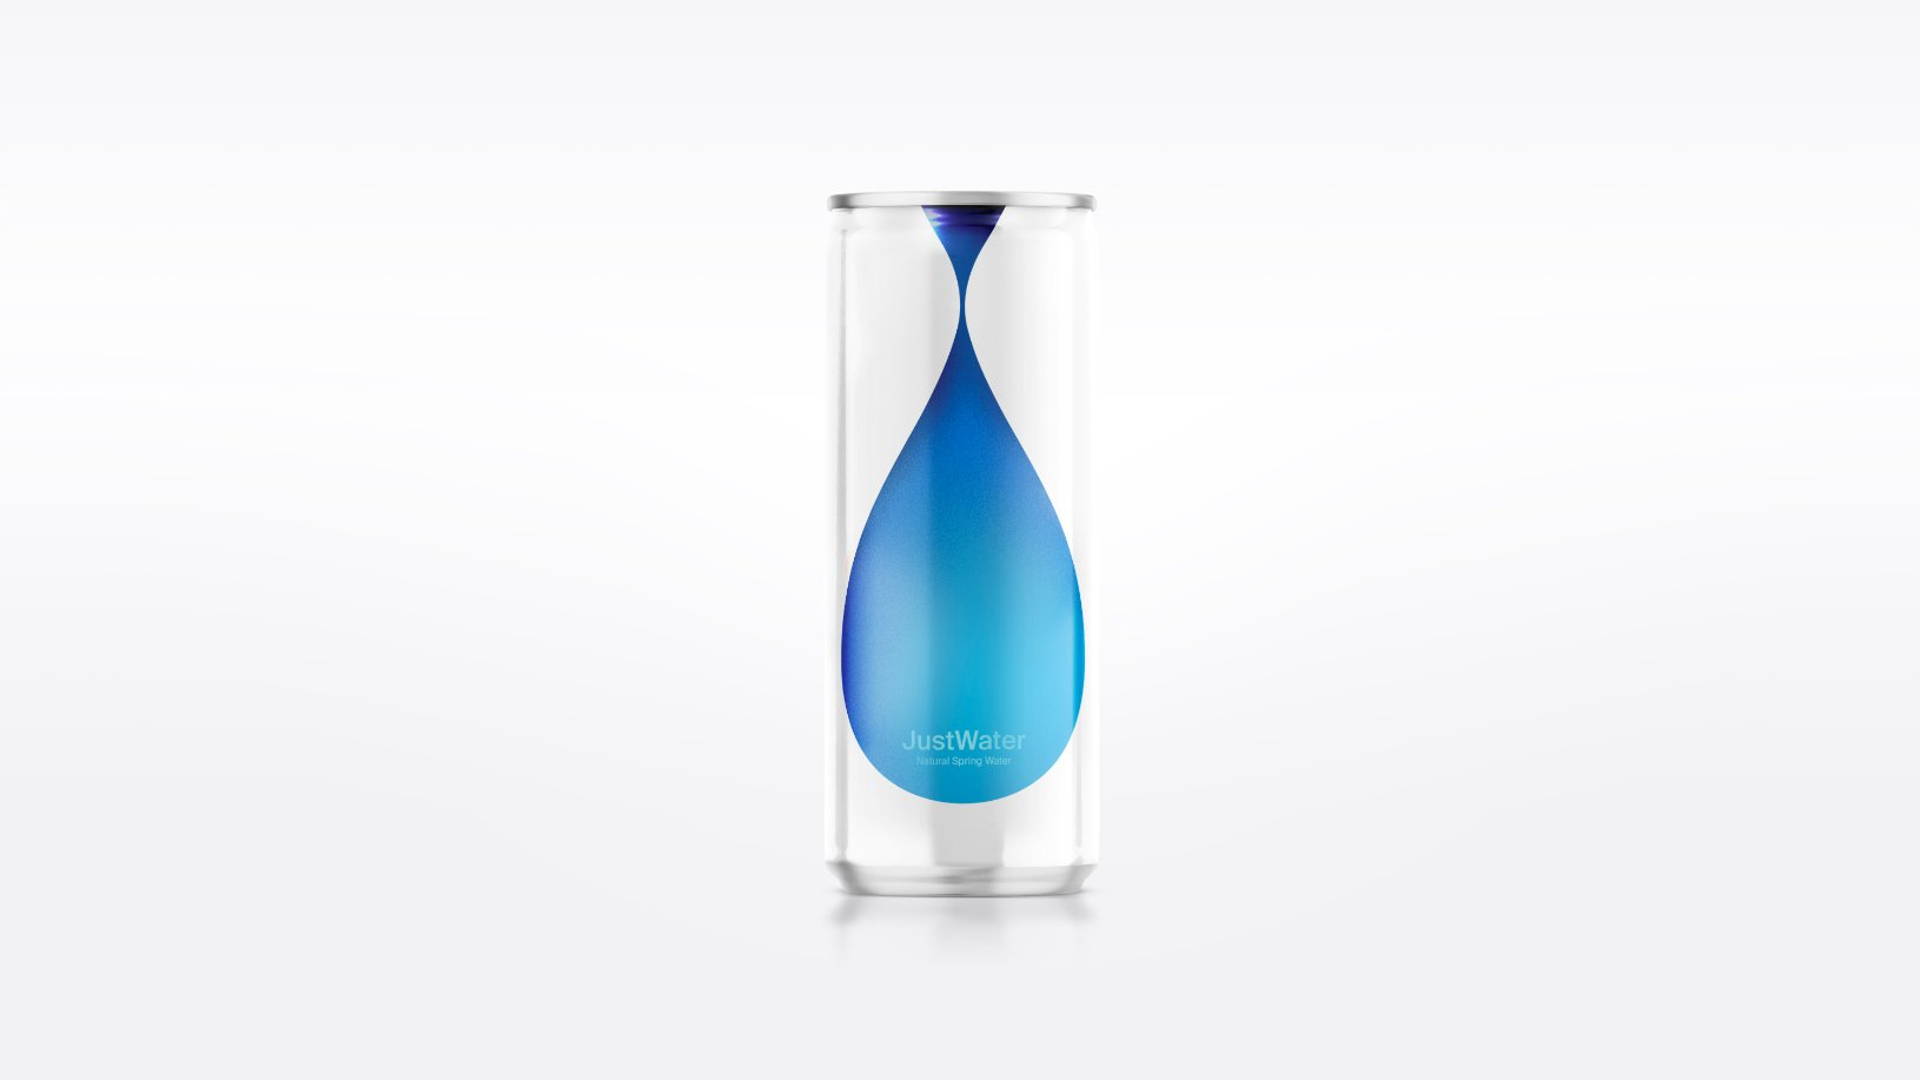 Featured image for The Sustainability Of JustWater Reflects The Cleanness Of The Product